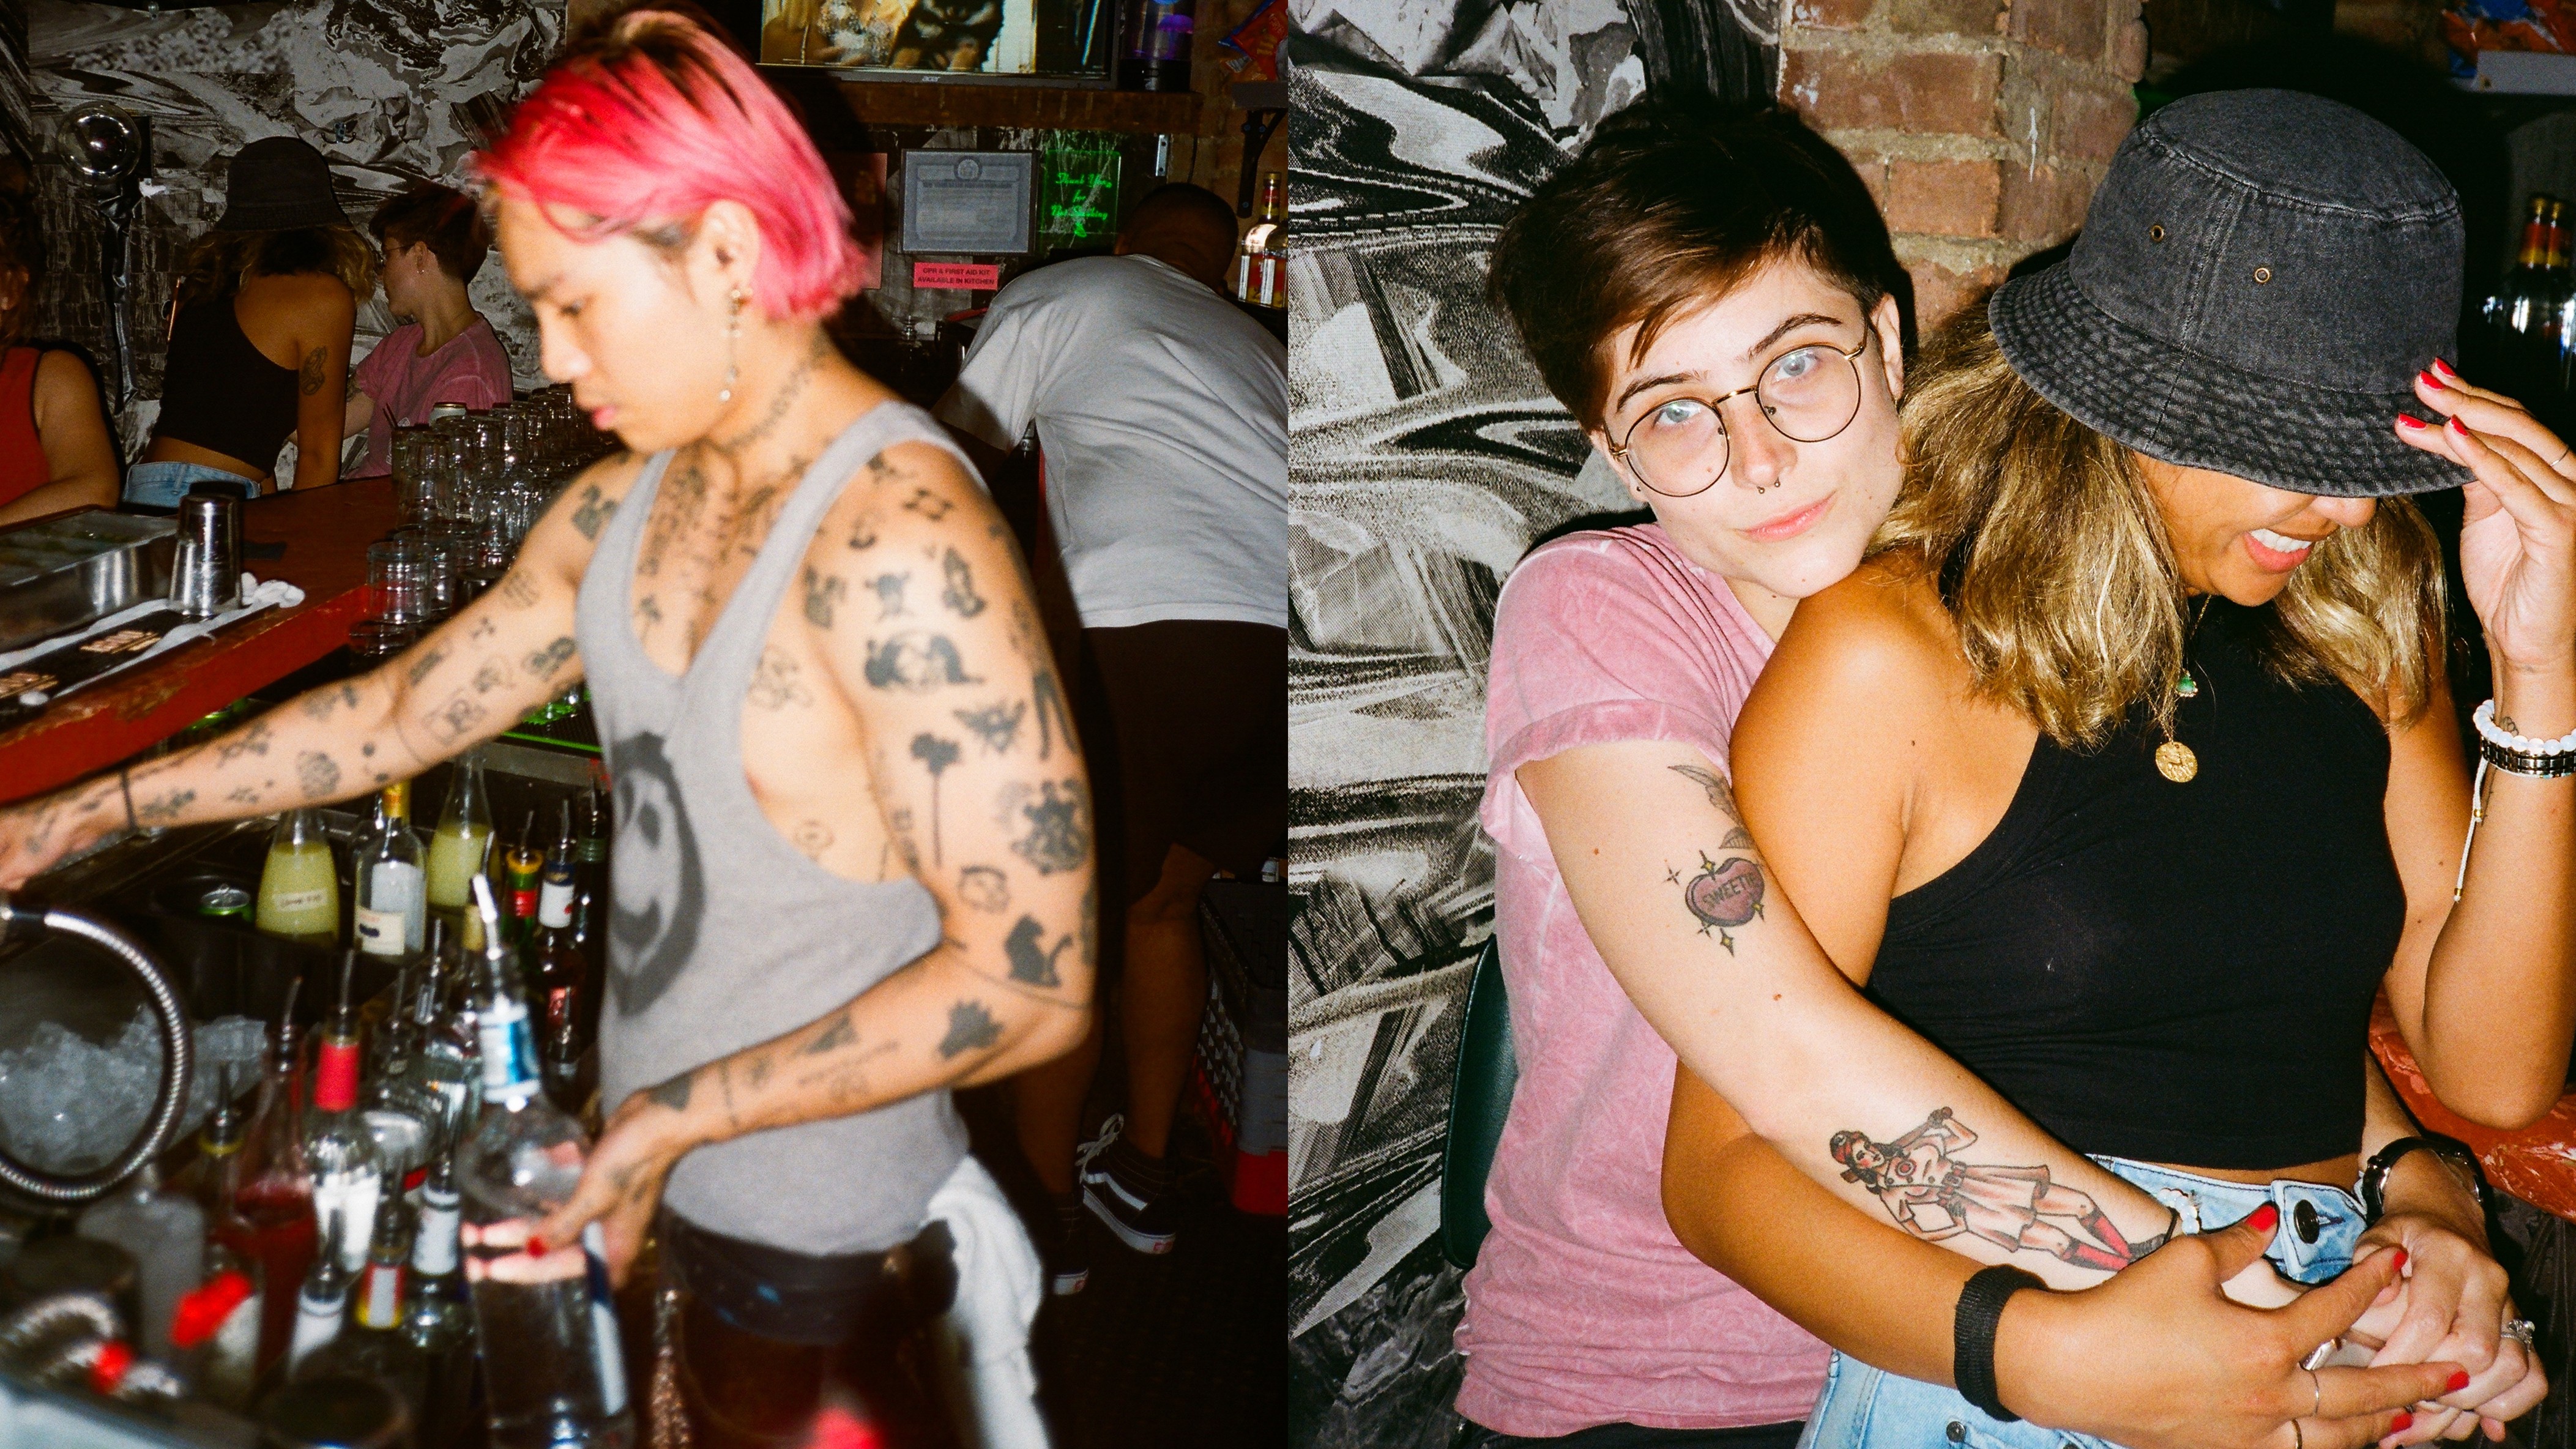 At home in the club: the LGBT parties changing the face of Brooklyn's  nightlife, New York